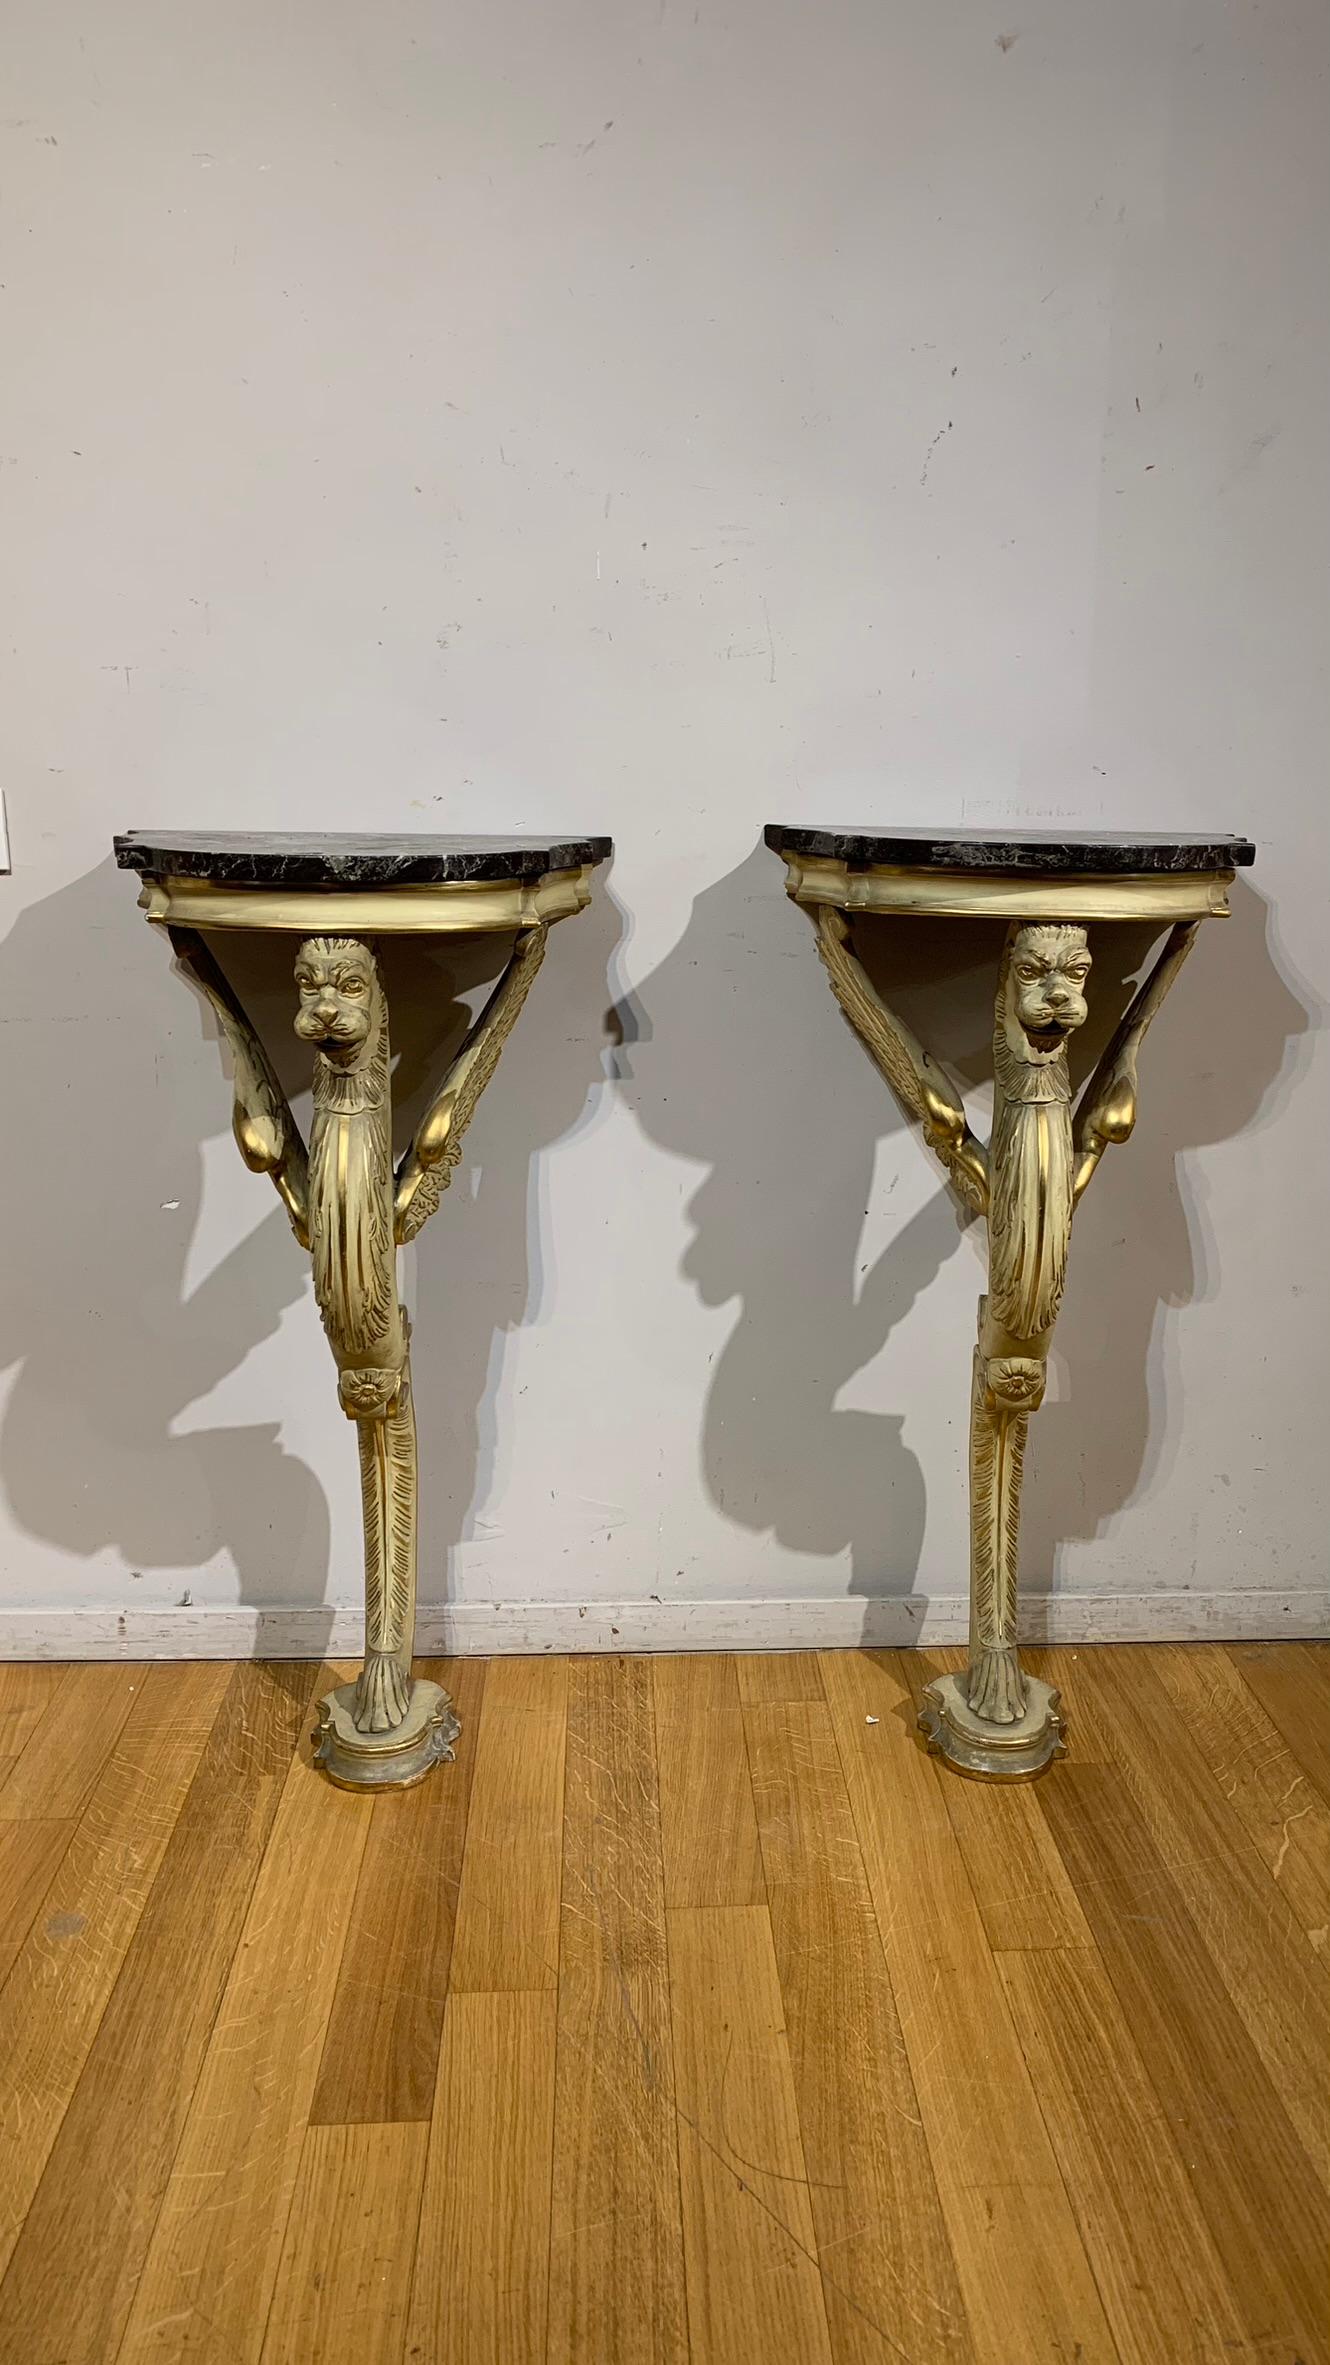 Beautiful pair of wall consoles supported by a winged fantastic animal with one leg made of carved and painted ivory-colored wood with pure gold leaf highlights.
The use of these particular griffins traces the creation of these two small but